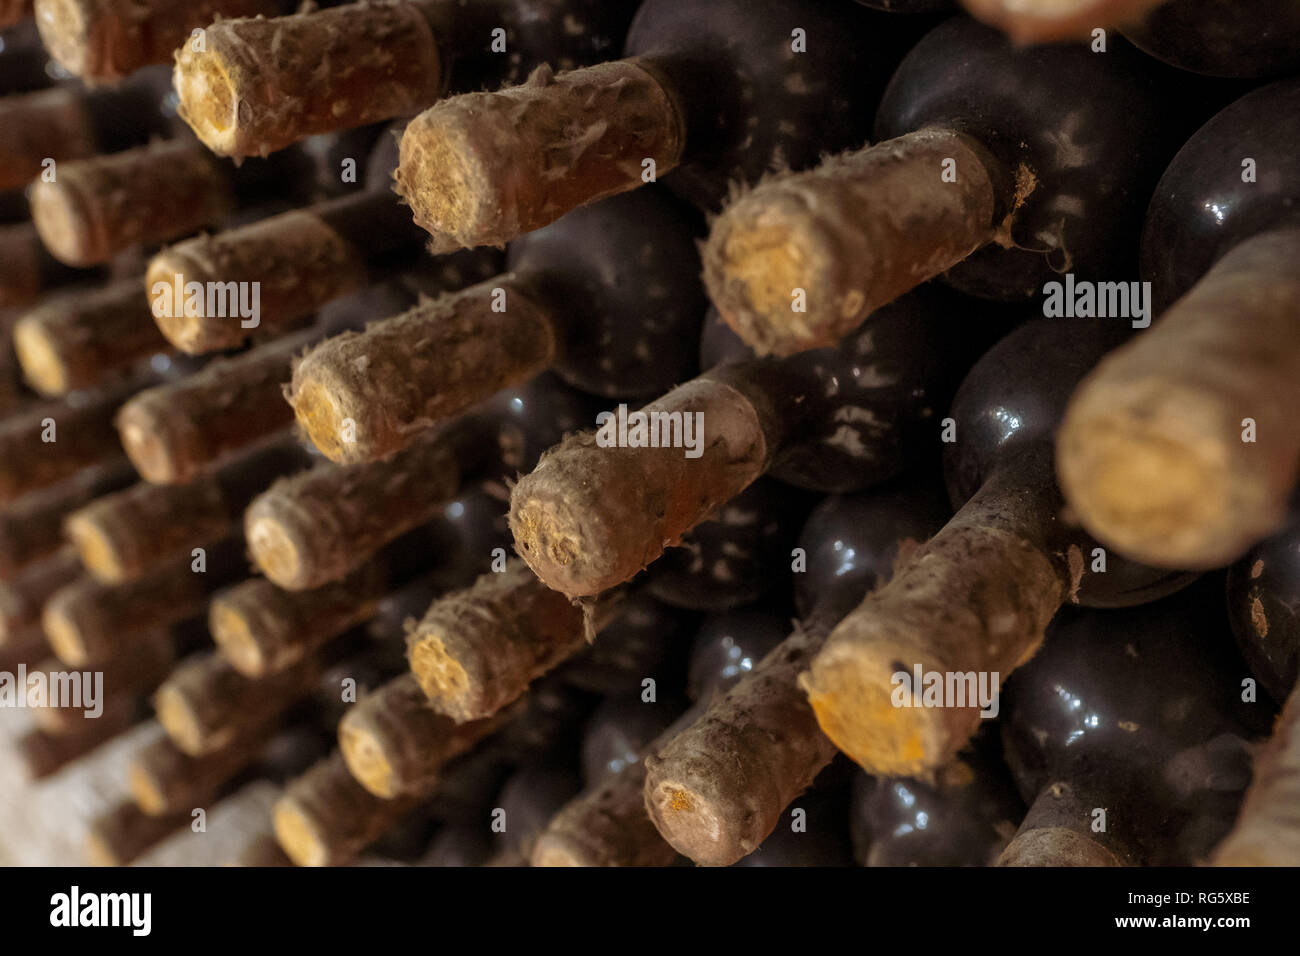 Closeup of a rack with old wine bottles covered in dust and cobweb in a winecellar in France Stock Photo